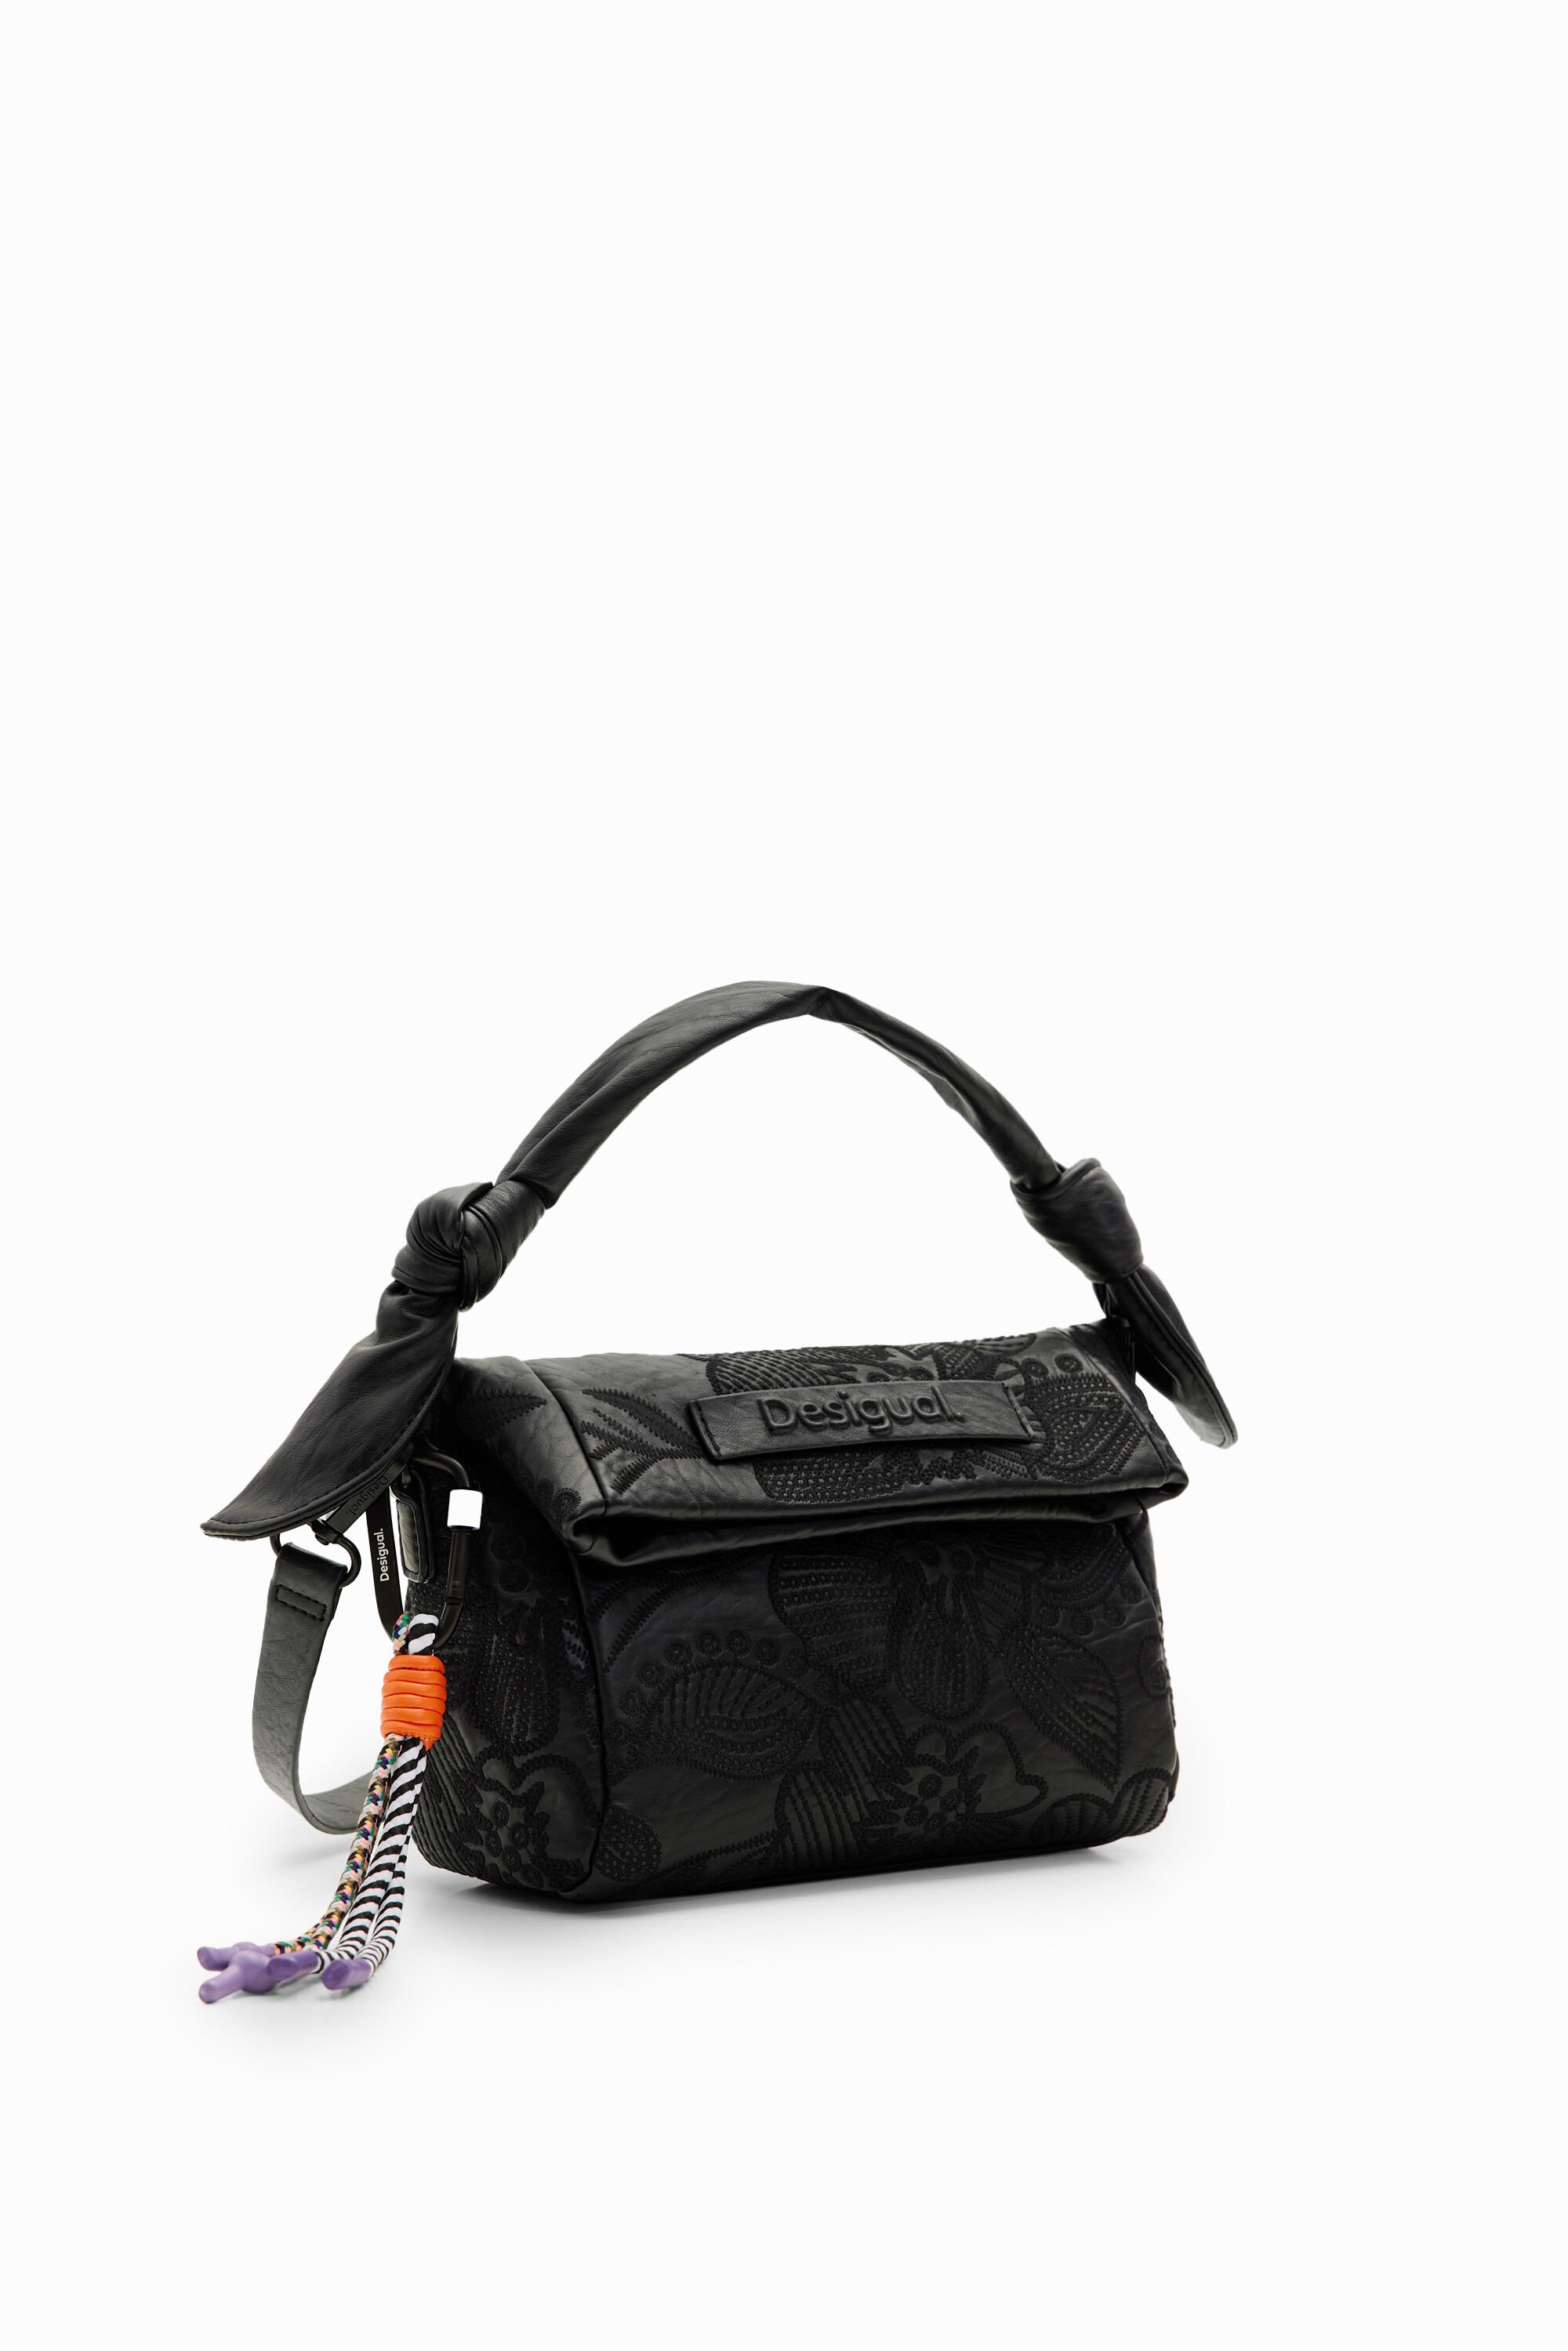 Desigual XS embroidered floral bag